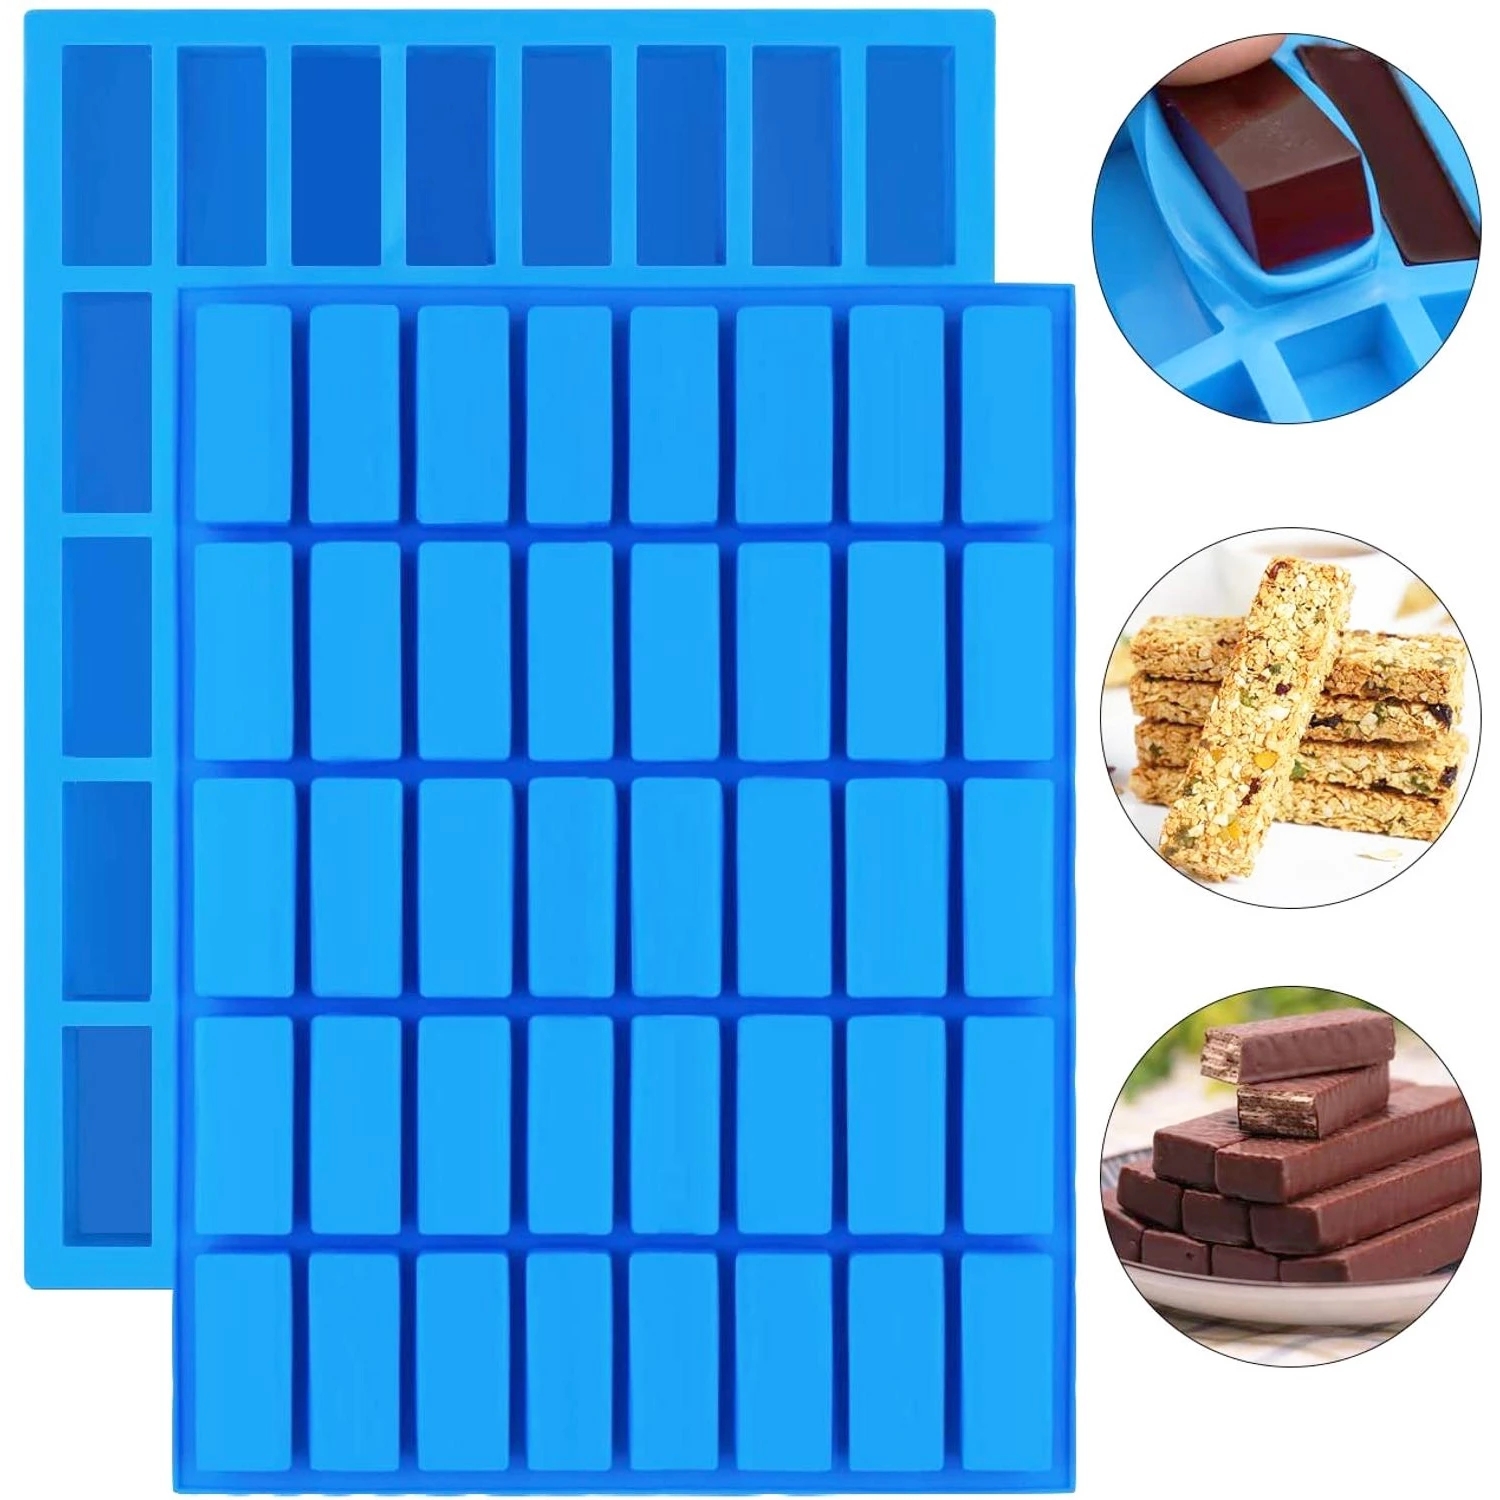 B Outflower 4 Square Cavity Rectangle DIY Soap Mold Jelly Ice Cake Chocolate Silicone Moulds 